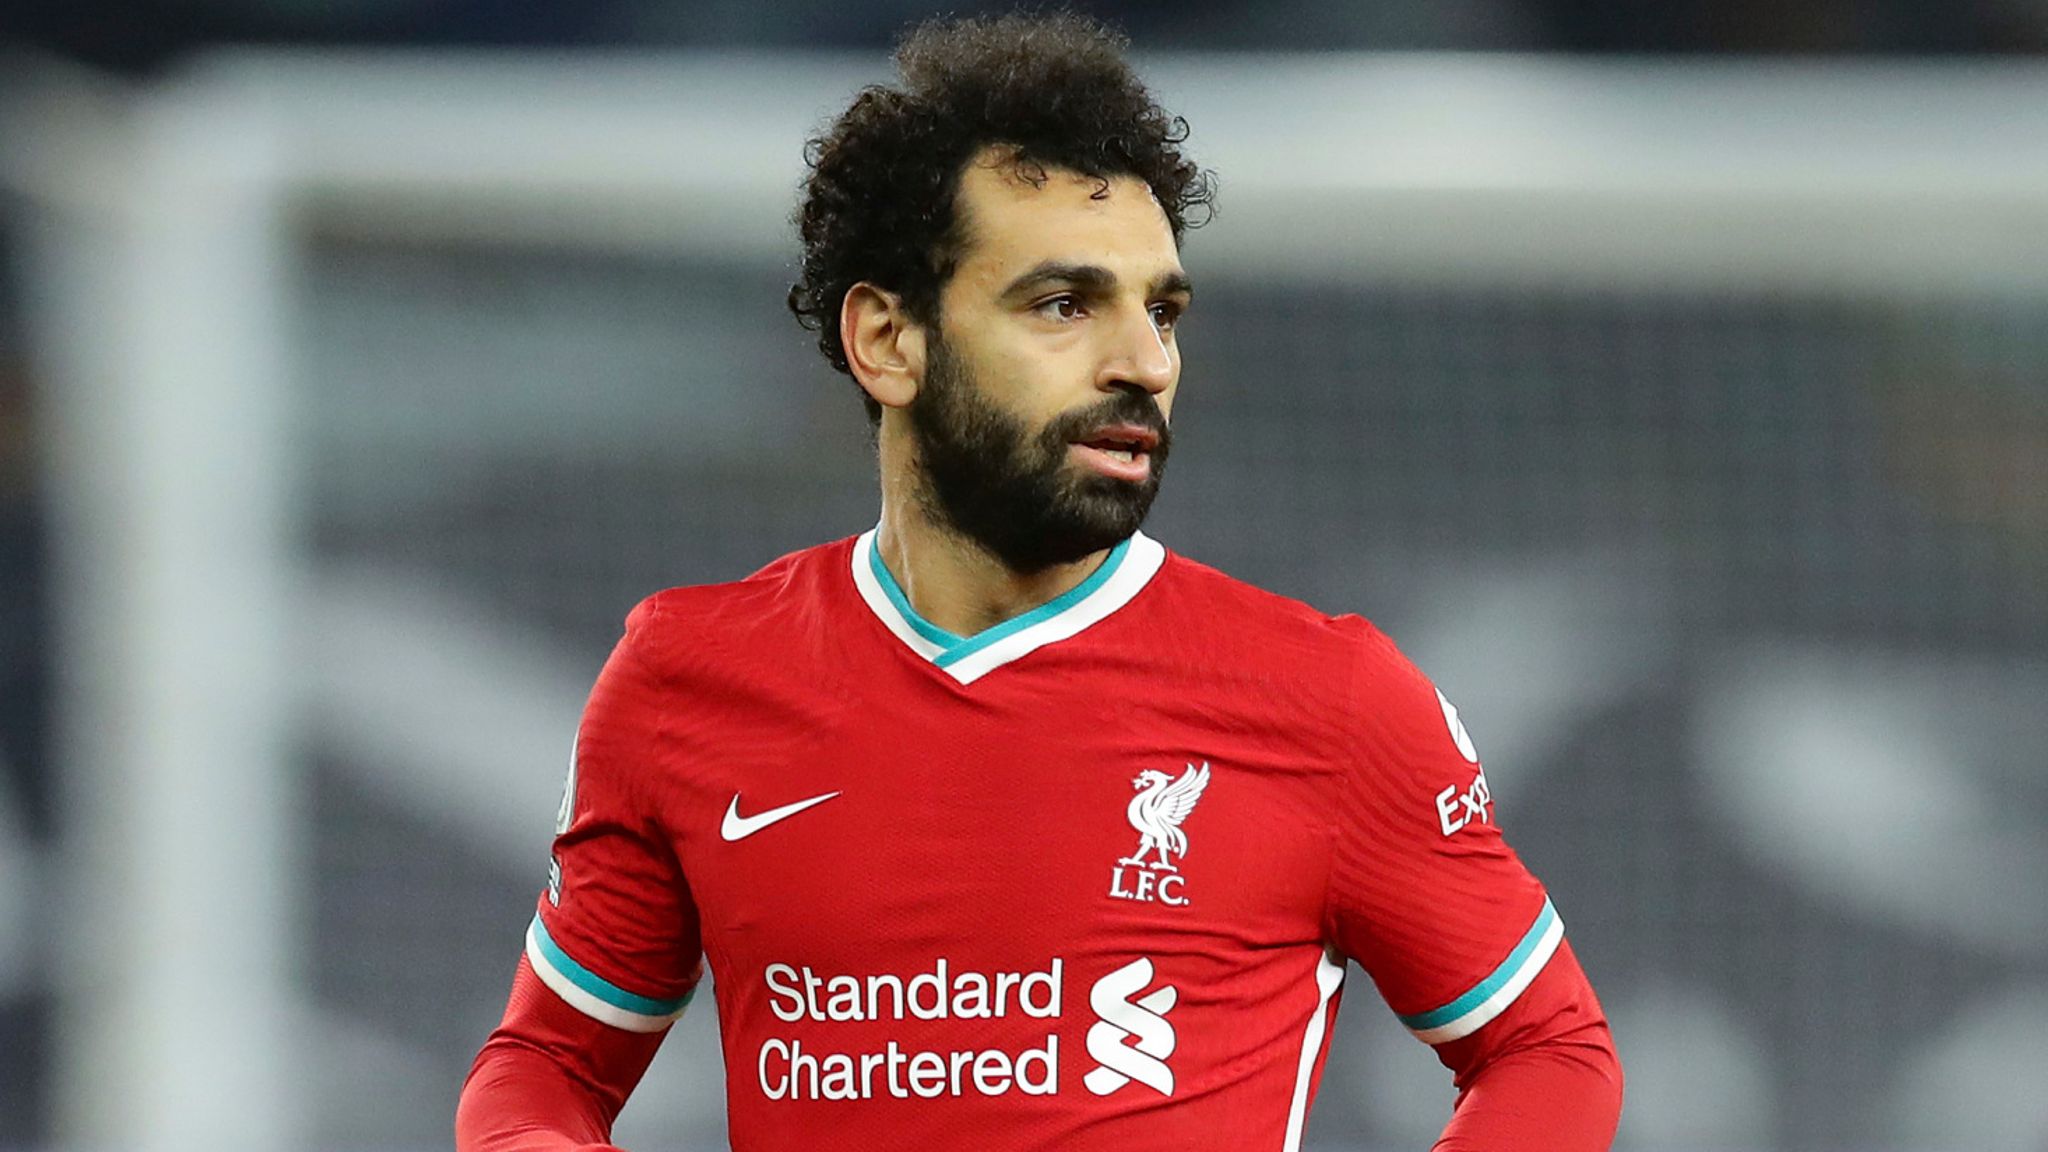 Manchester United vs Liverpool: Mohamed Salah continues his dominance with another magnificent performance